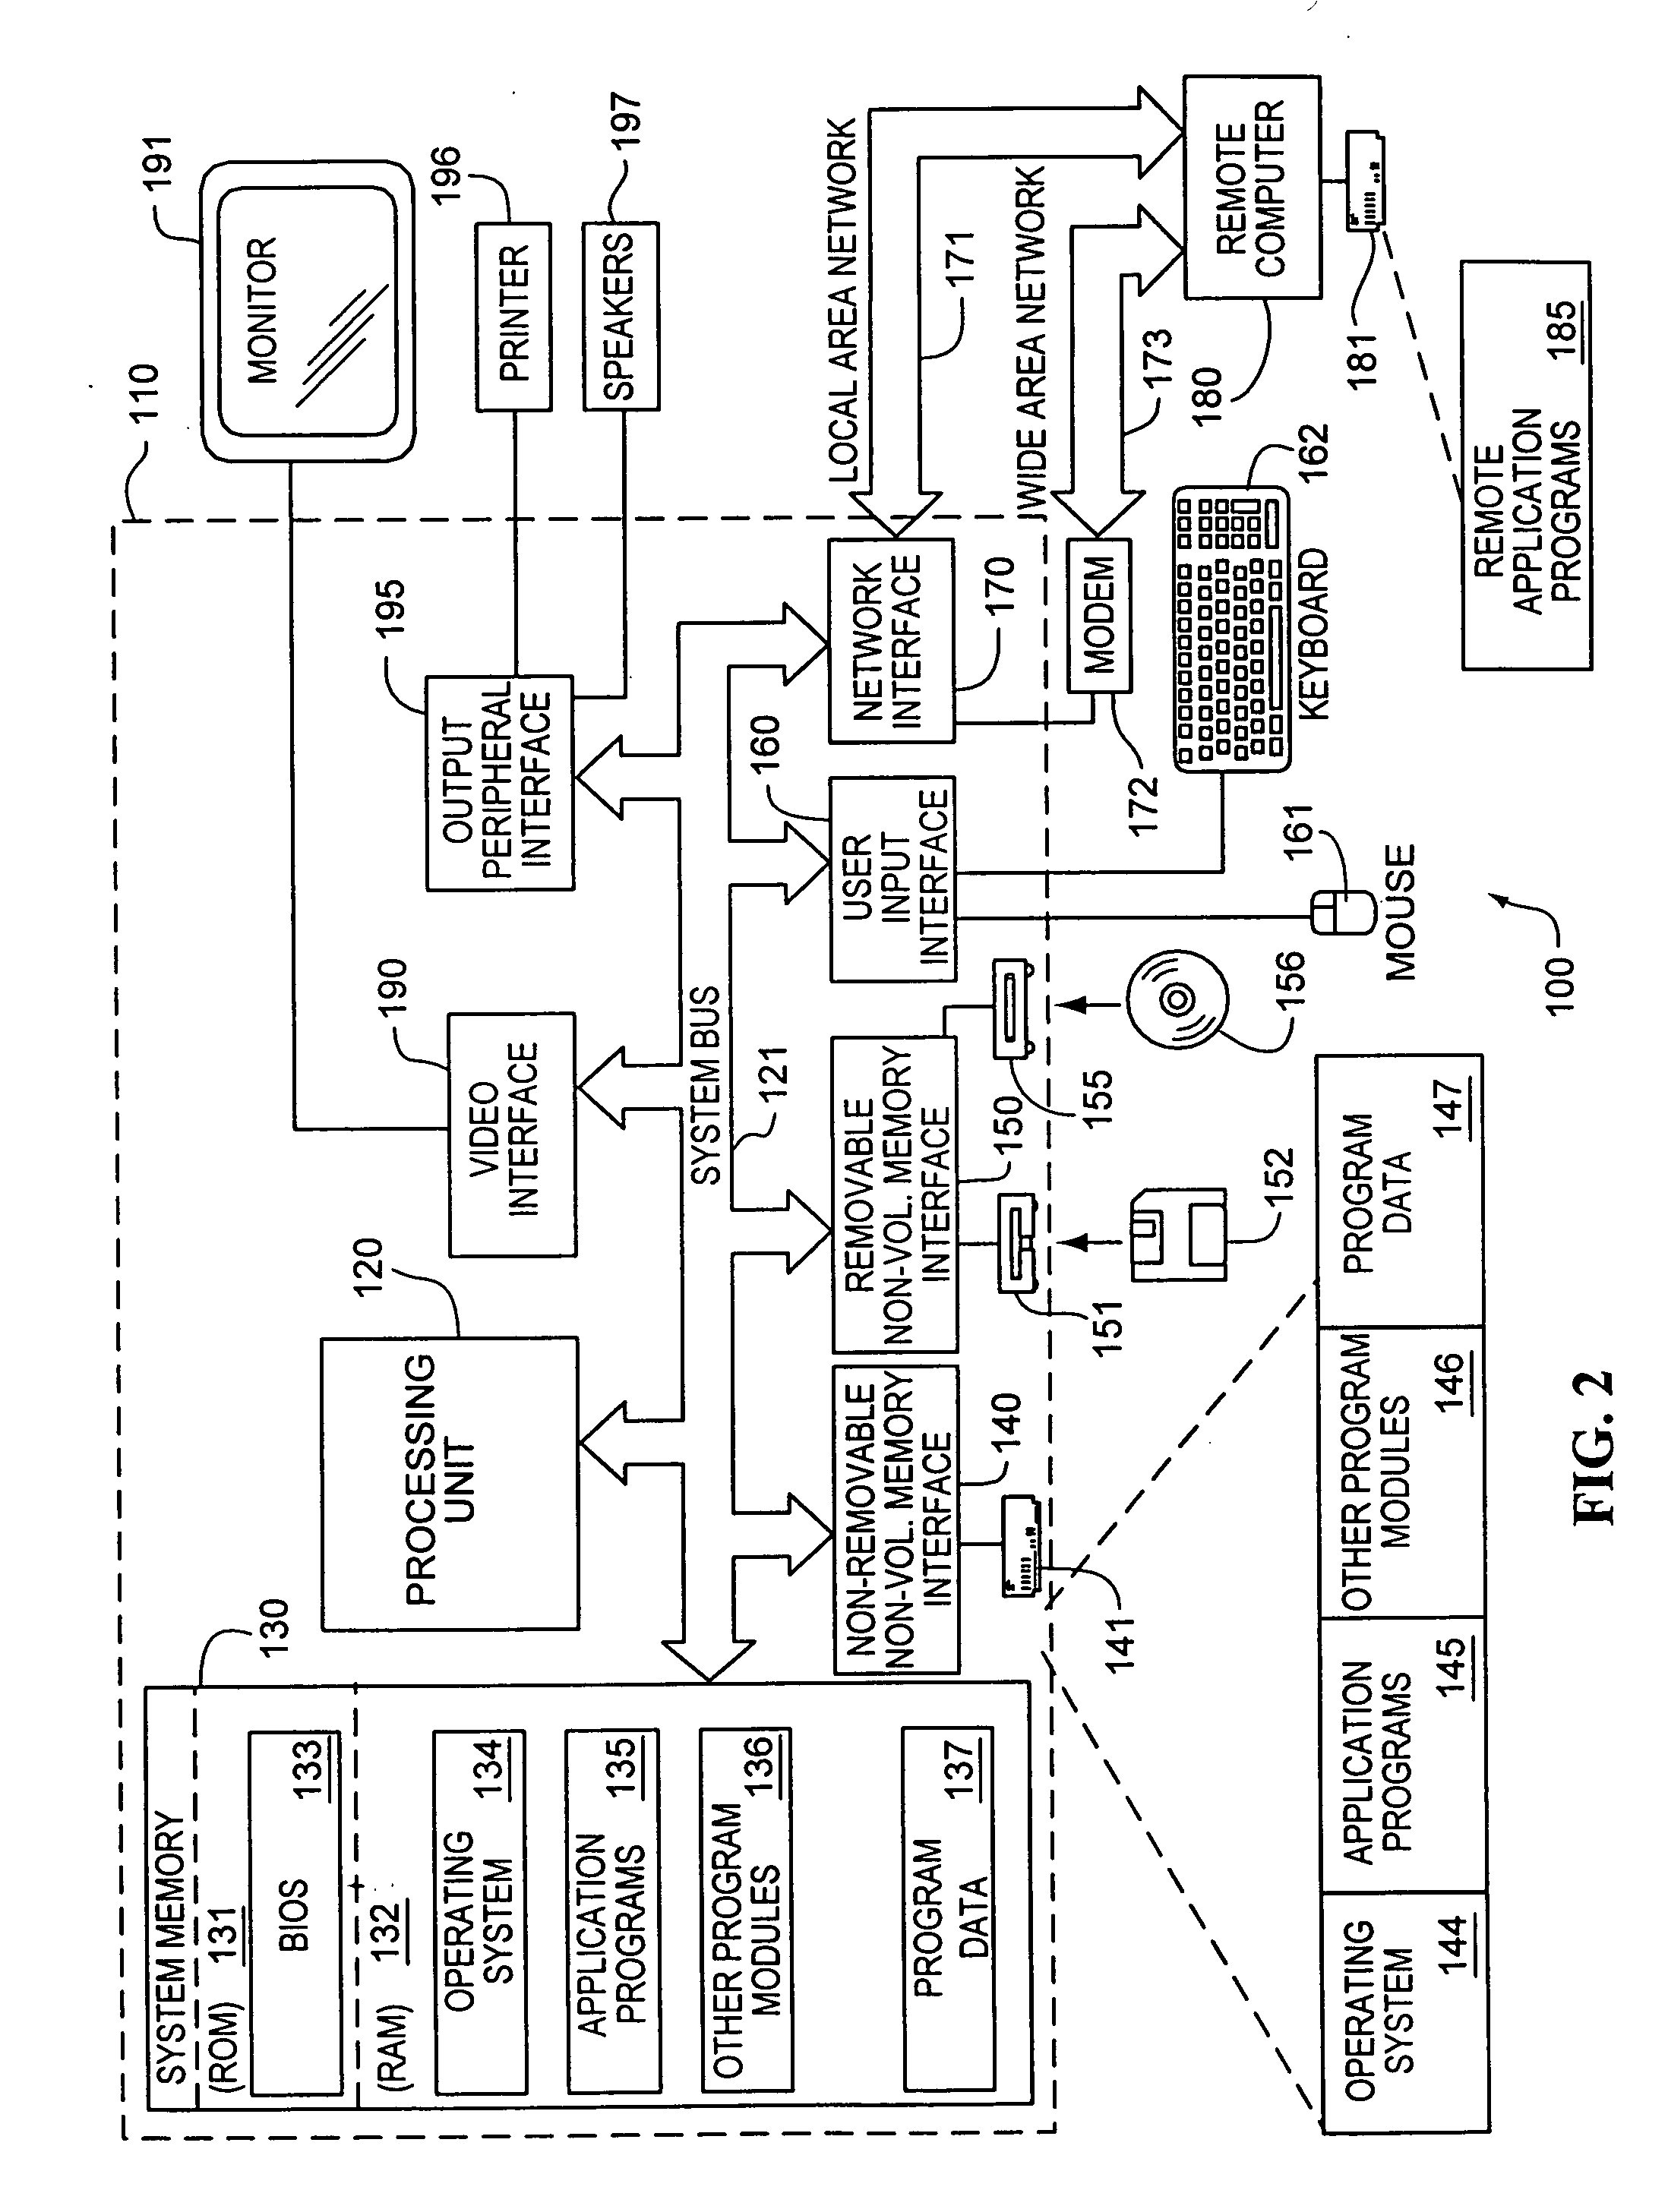 Binary cache file format for themeing the visual appearance of a computer system